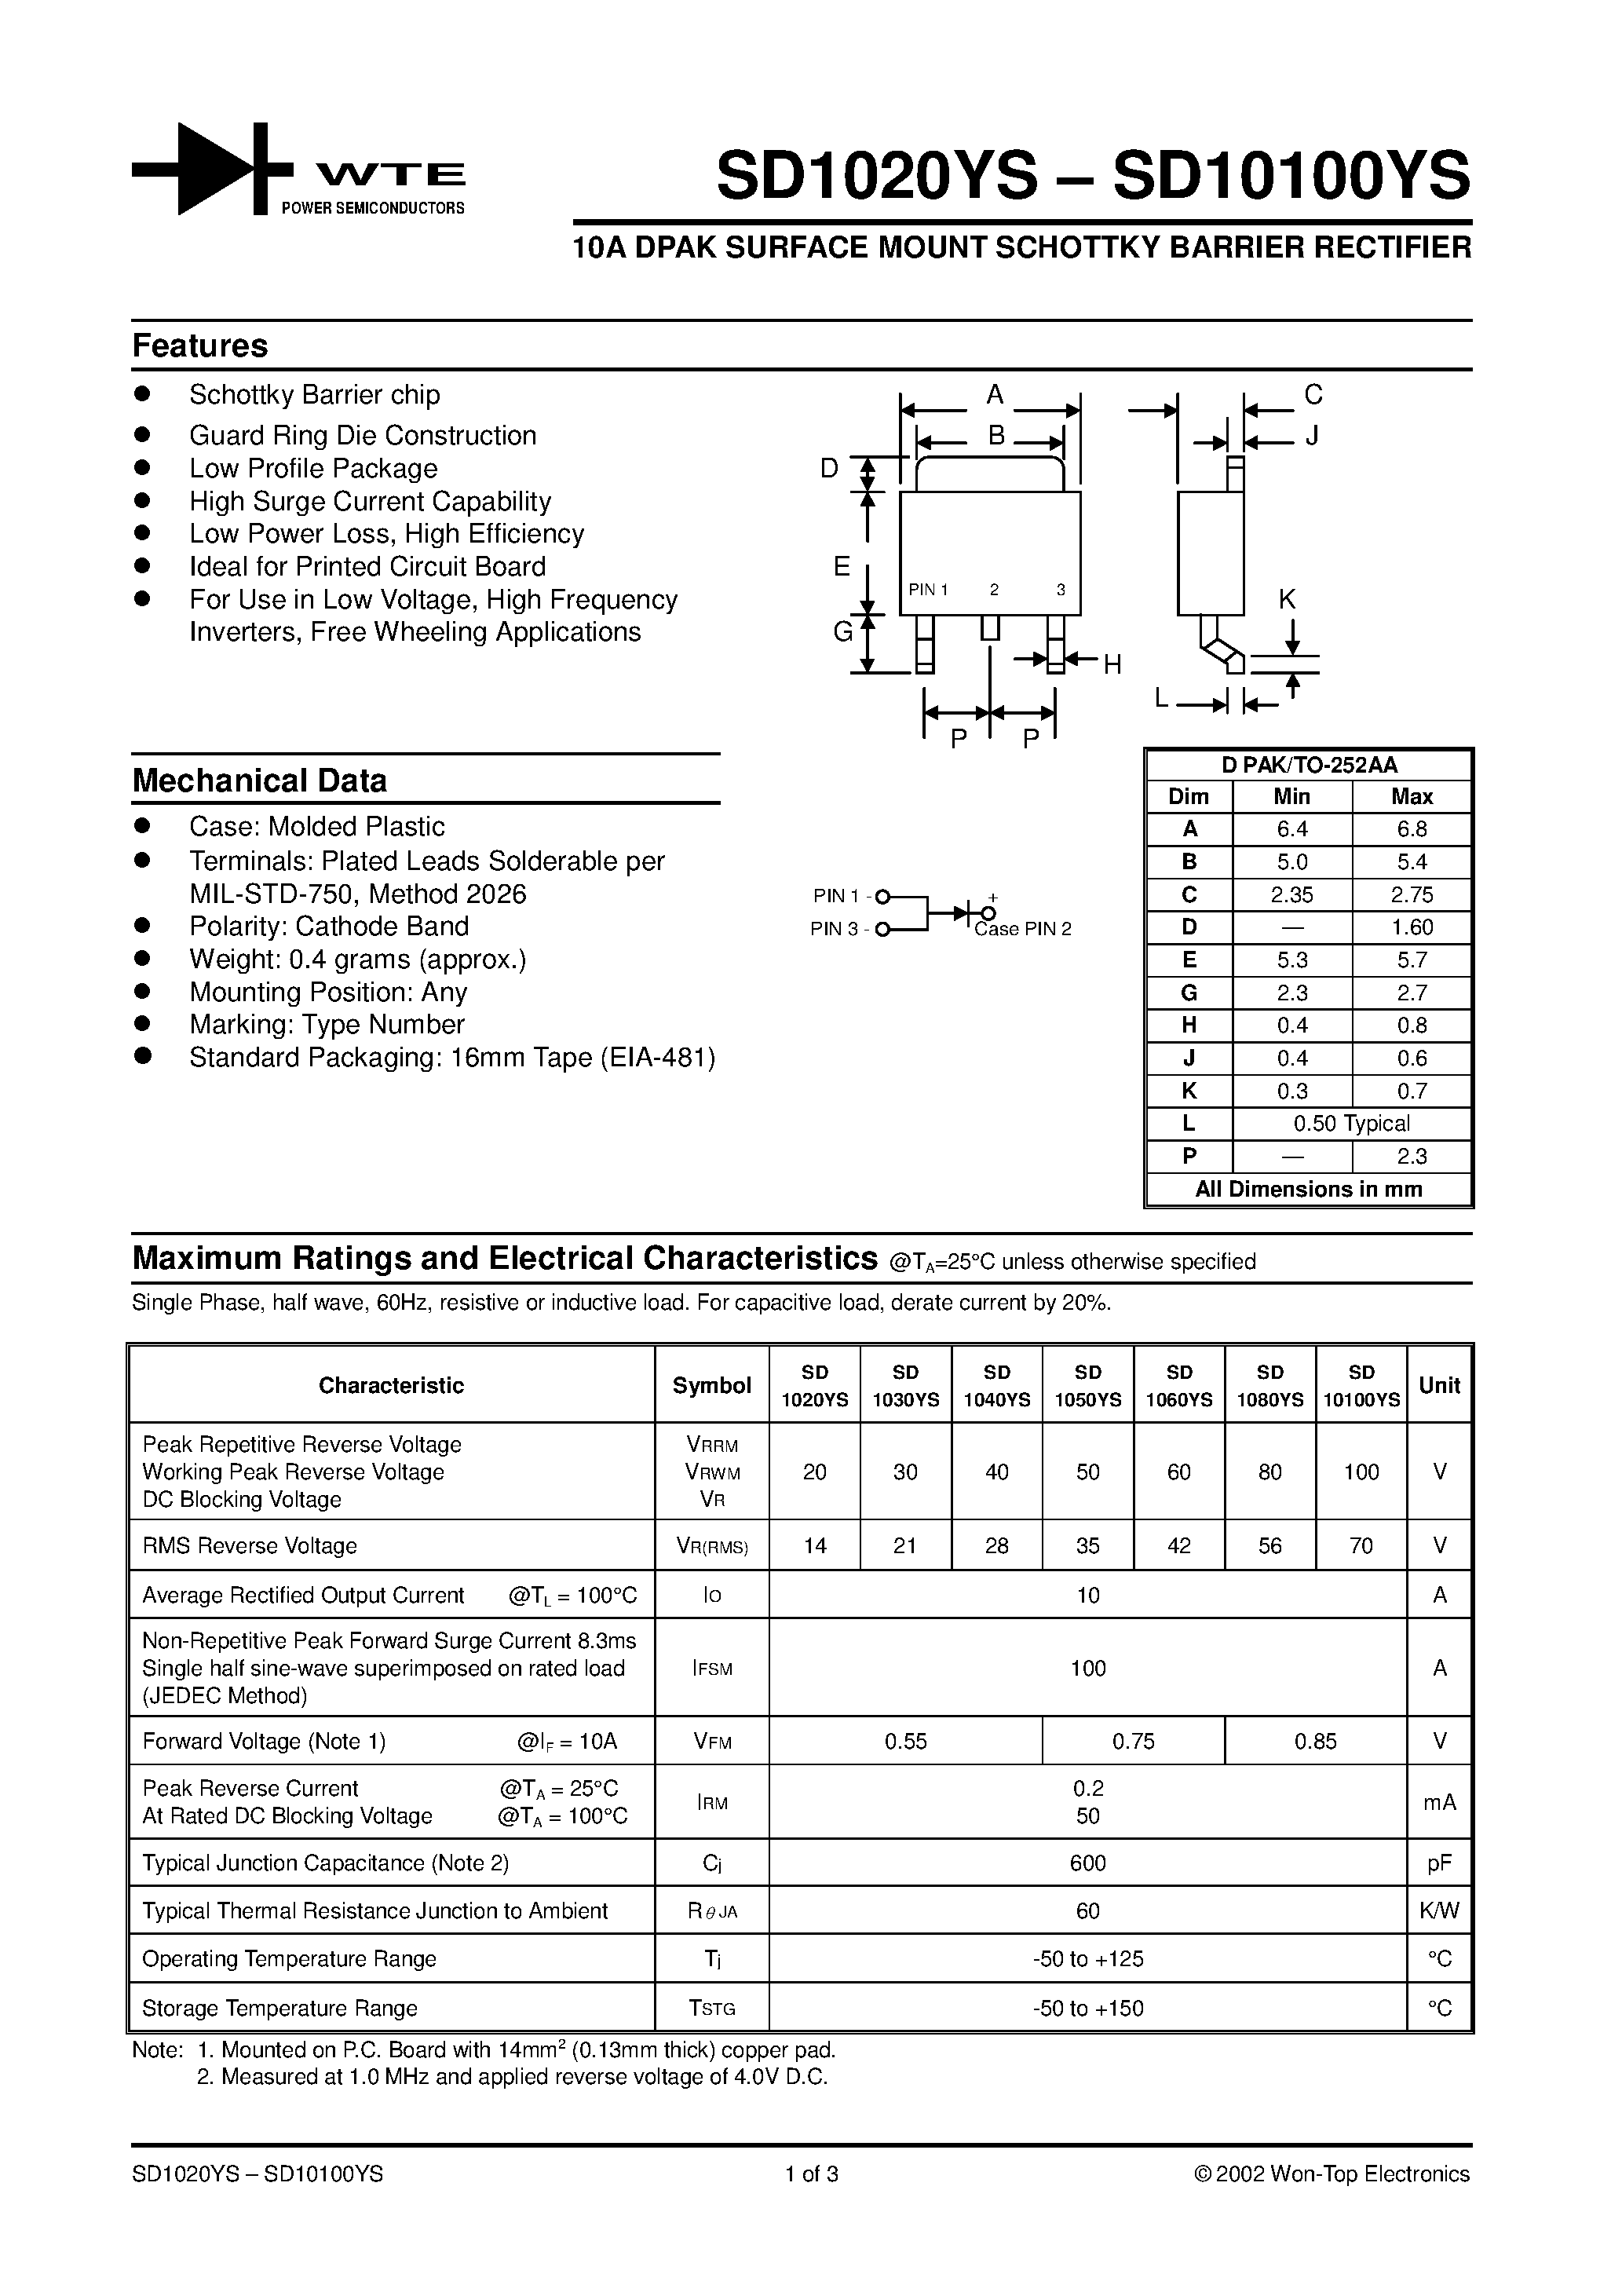 Datasheet SD10100YS - (SD1020YS - SD10100YS) 10A DPAK SURFACE MOUNT SCHOTTKY BARRIER RECTIFIER page 1